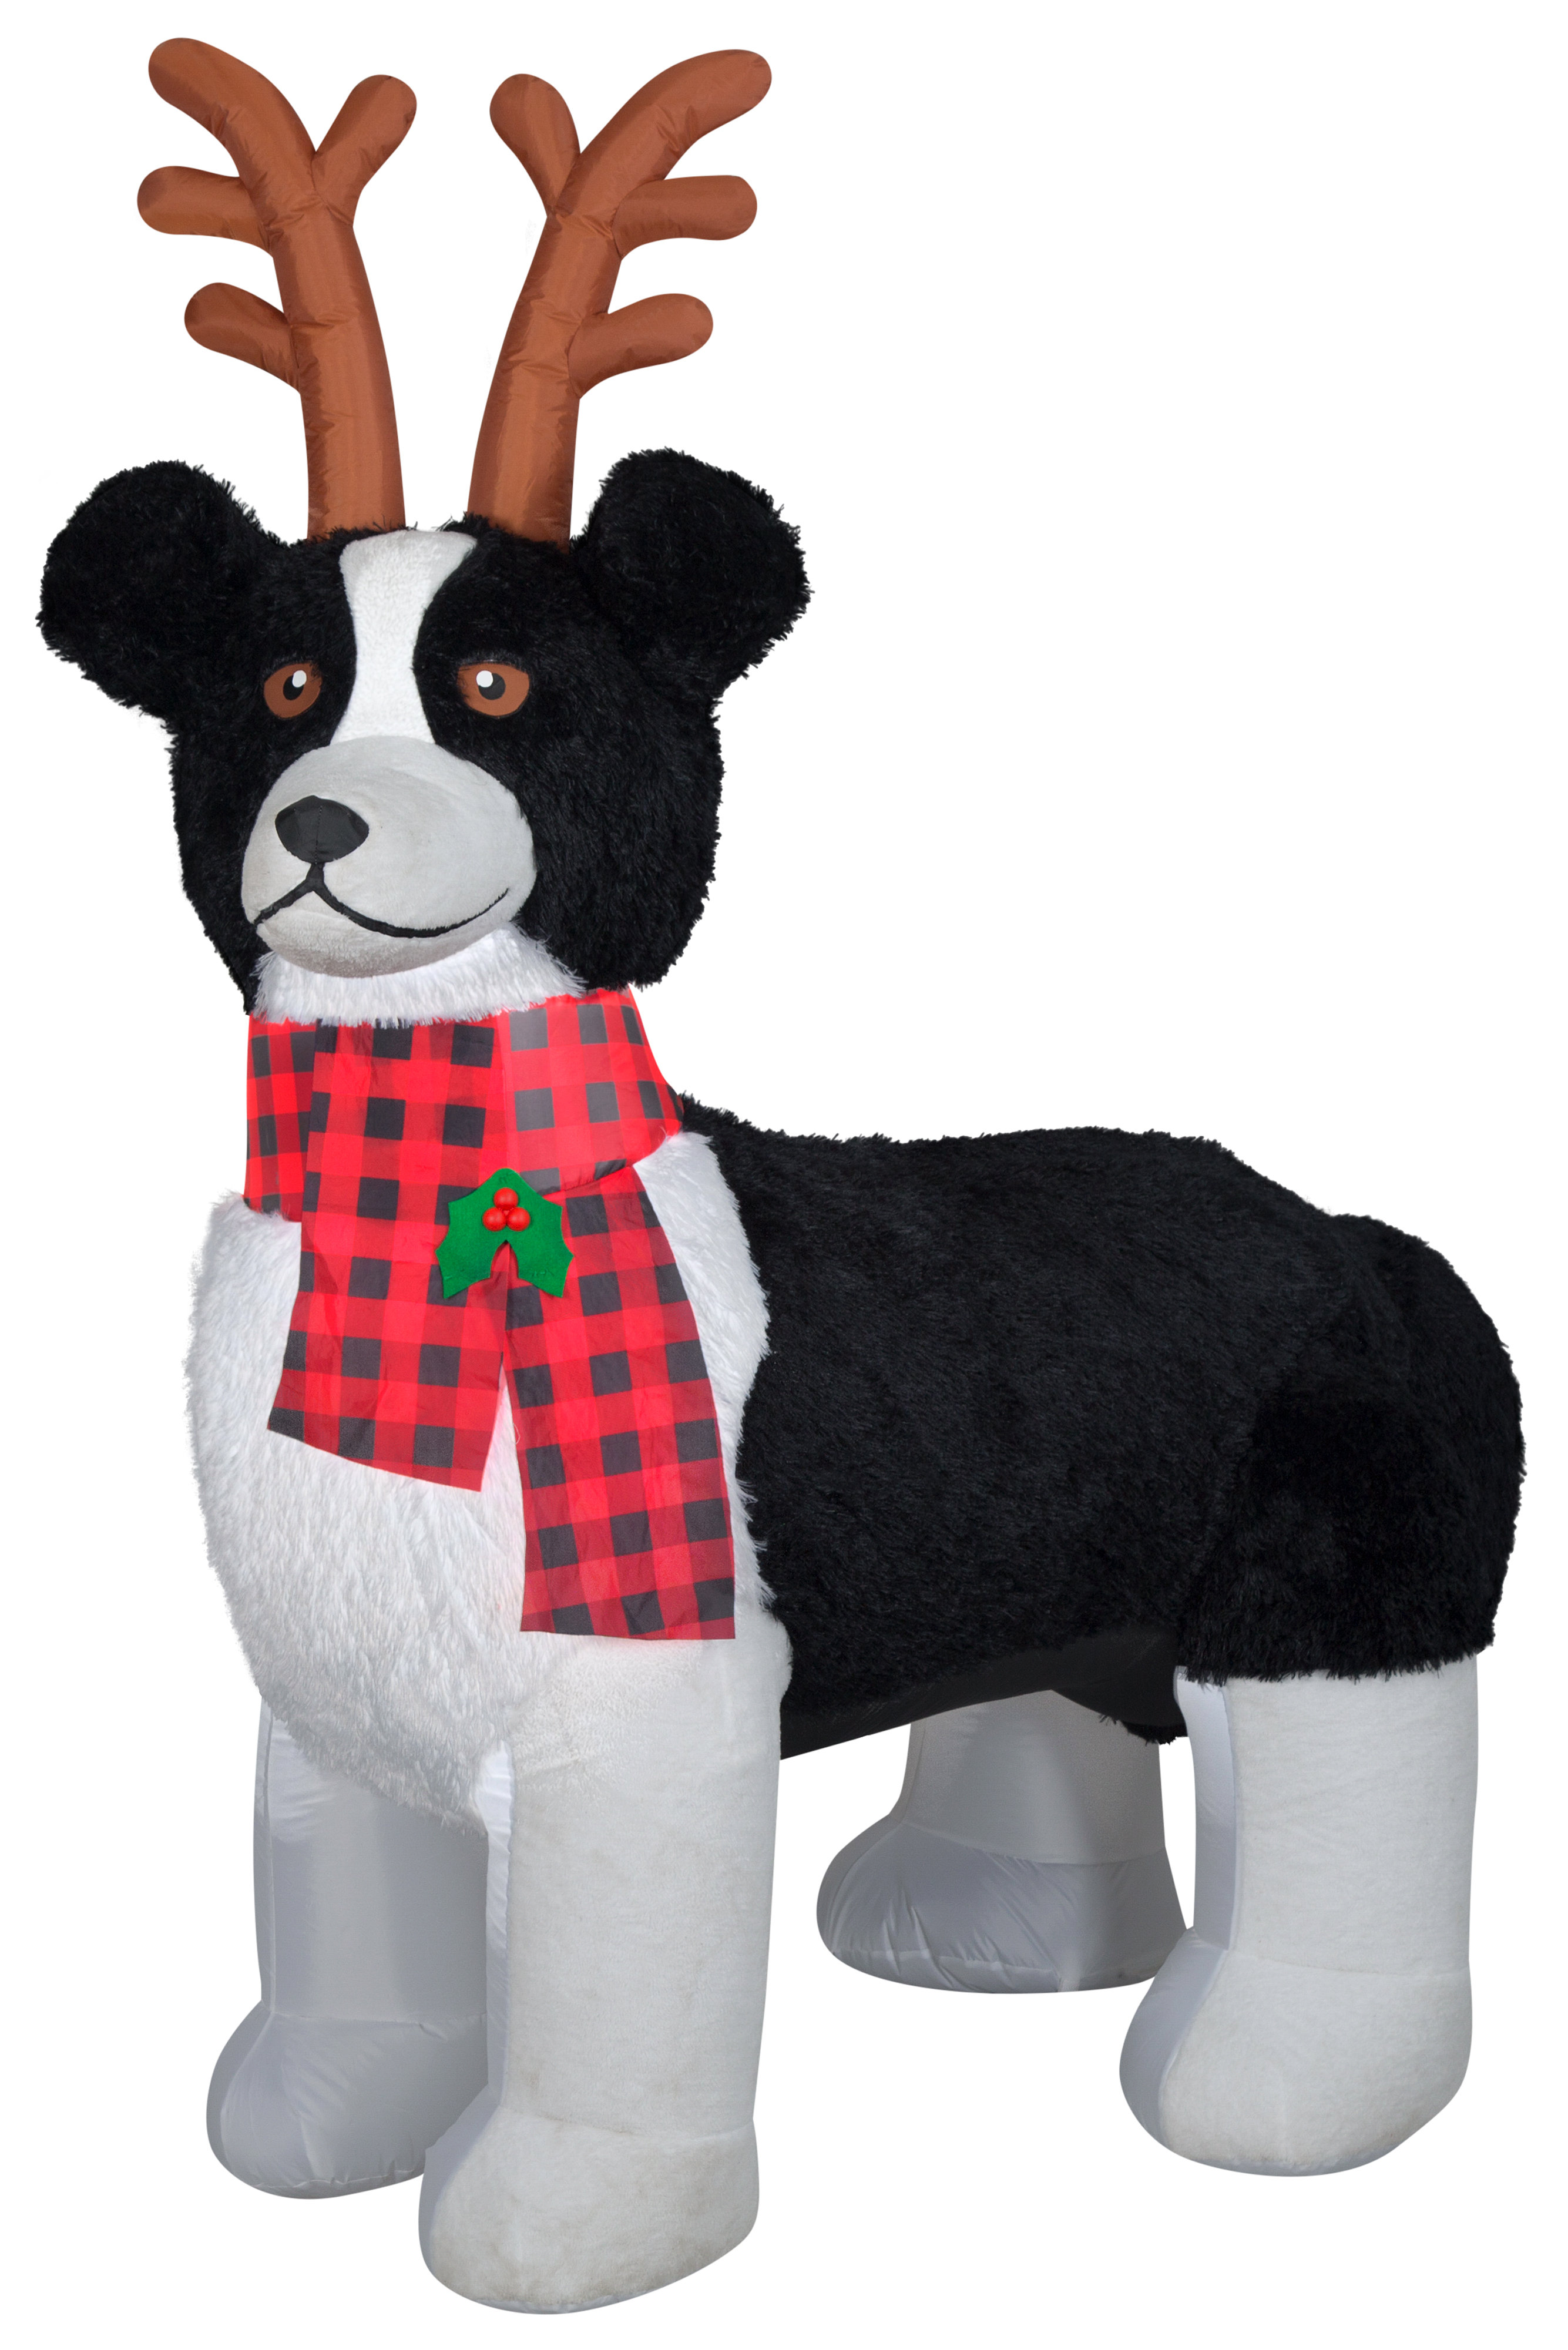 border collie red dog toys cute dog Fabric